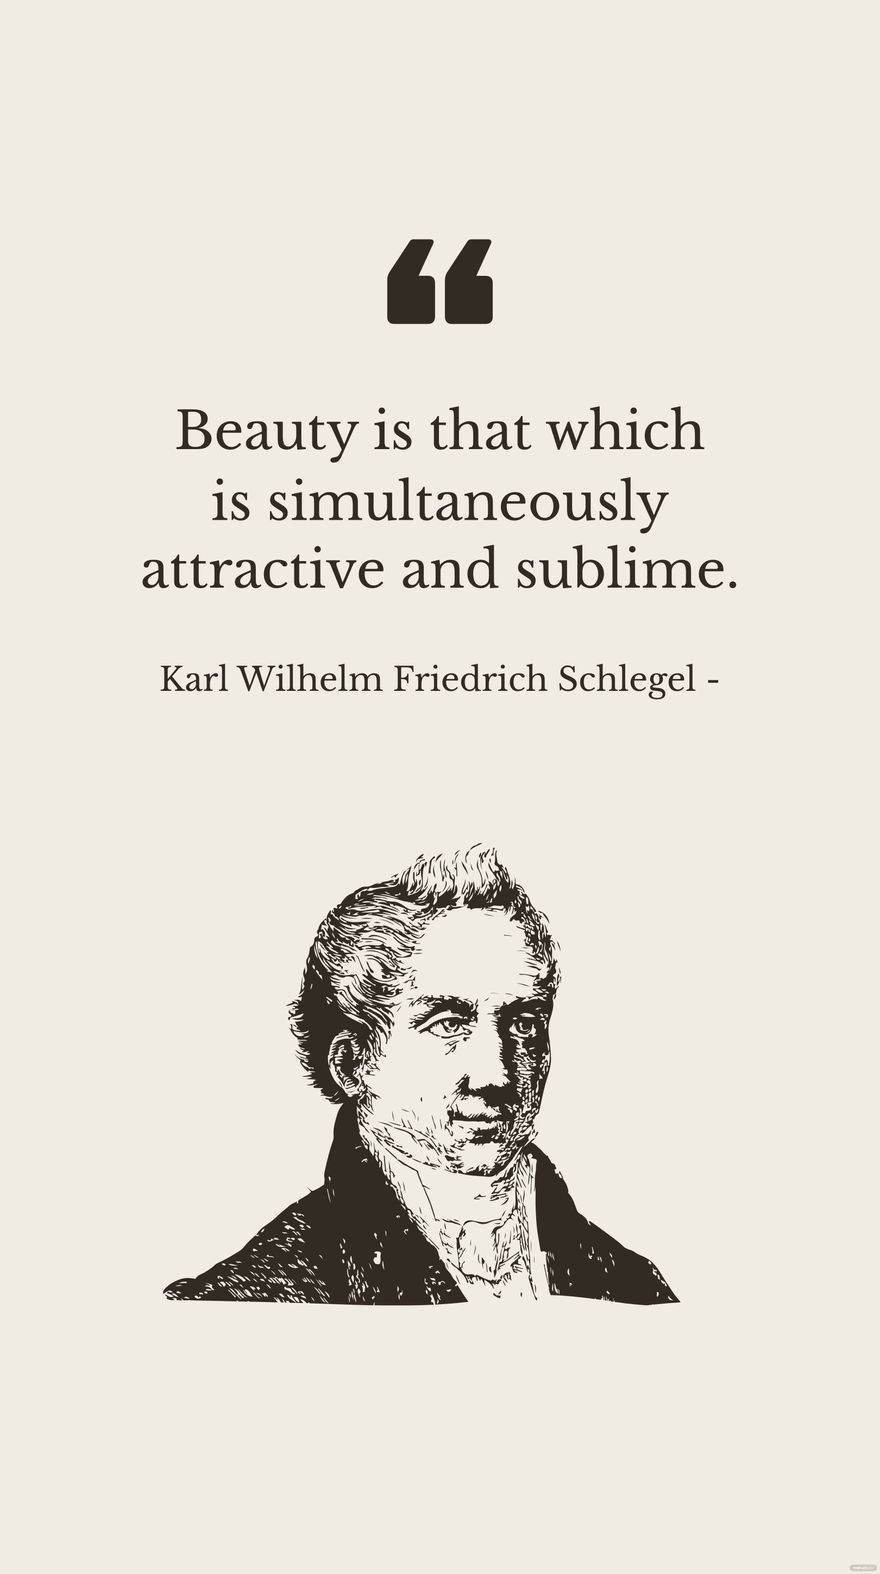 Karl Wilhelm Friedrich Schlegel - Beauty is that which is simultaneously attractive and sublime.